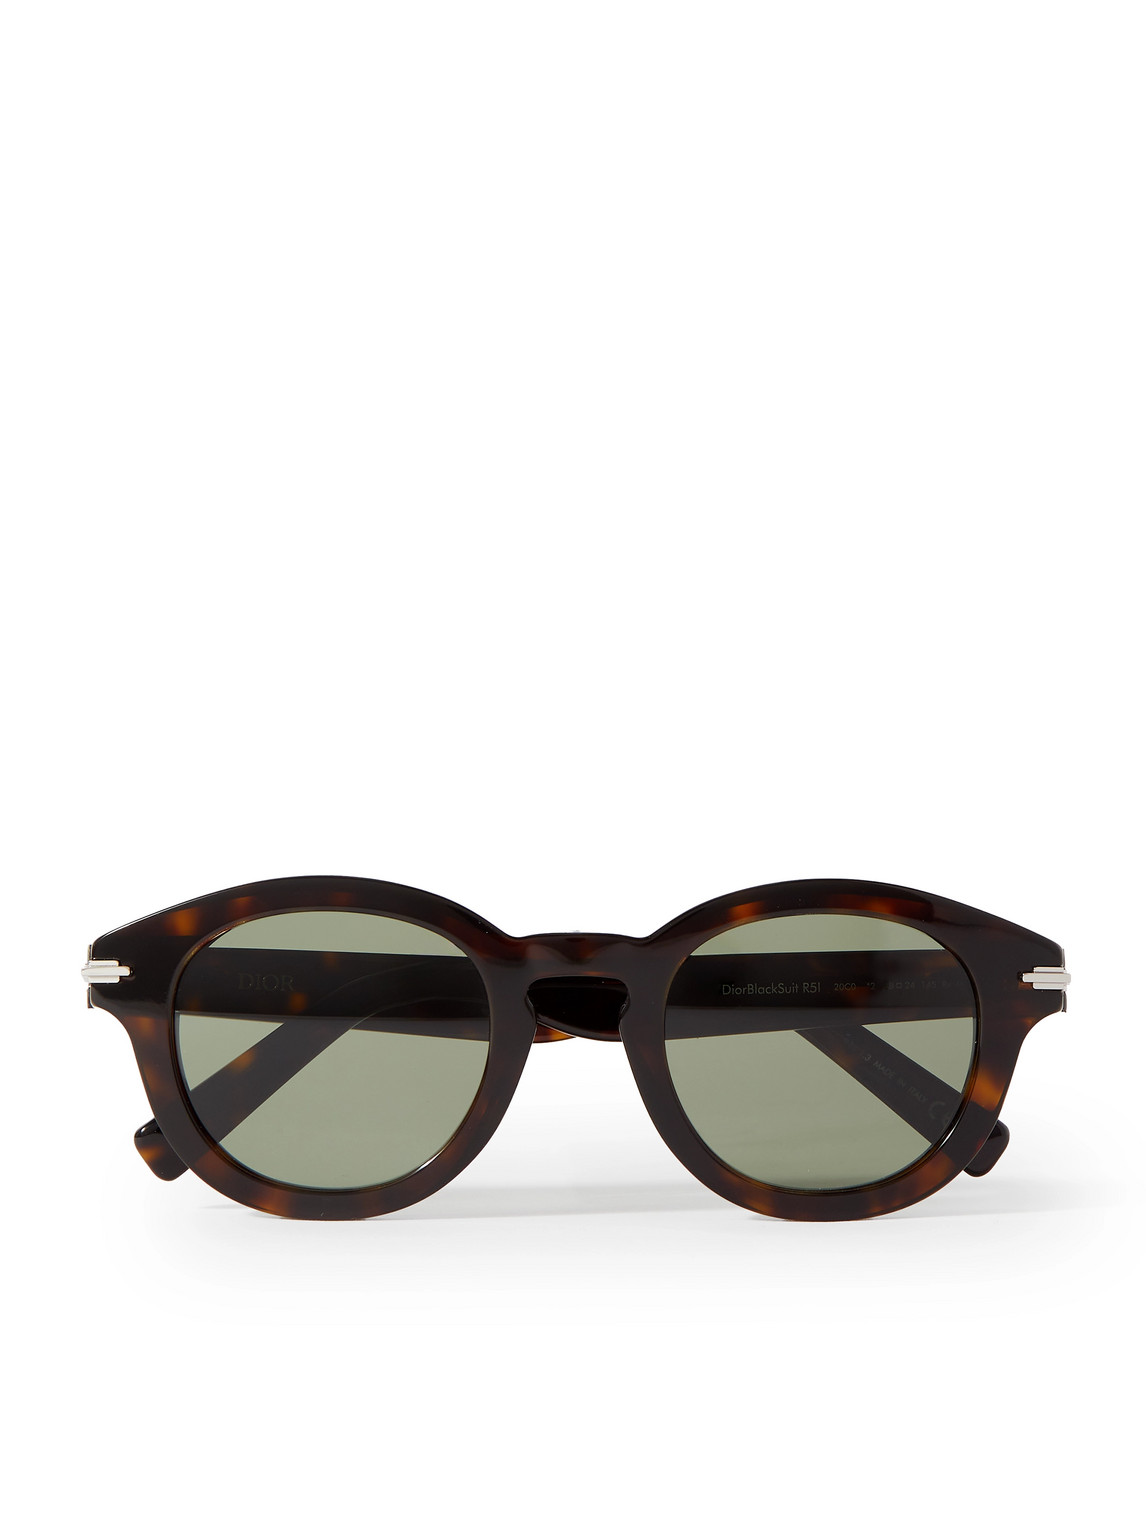 Dior Blacksuit R5i Round-frame Acetate Sunglasses In Unknown